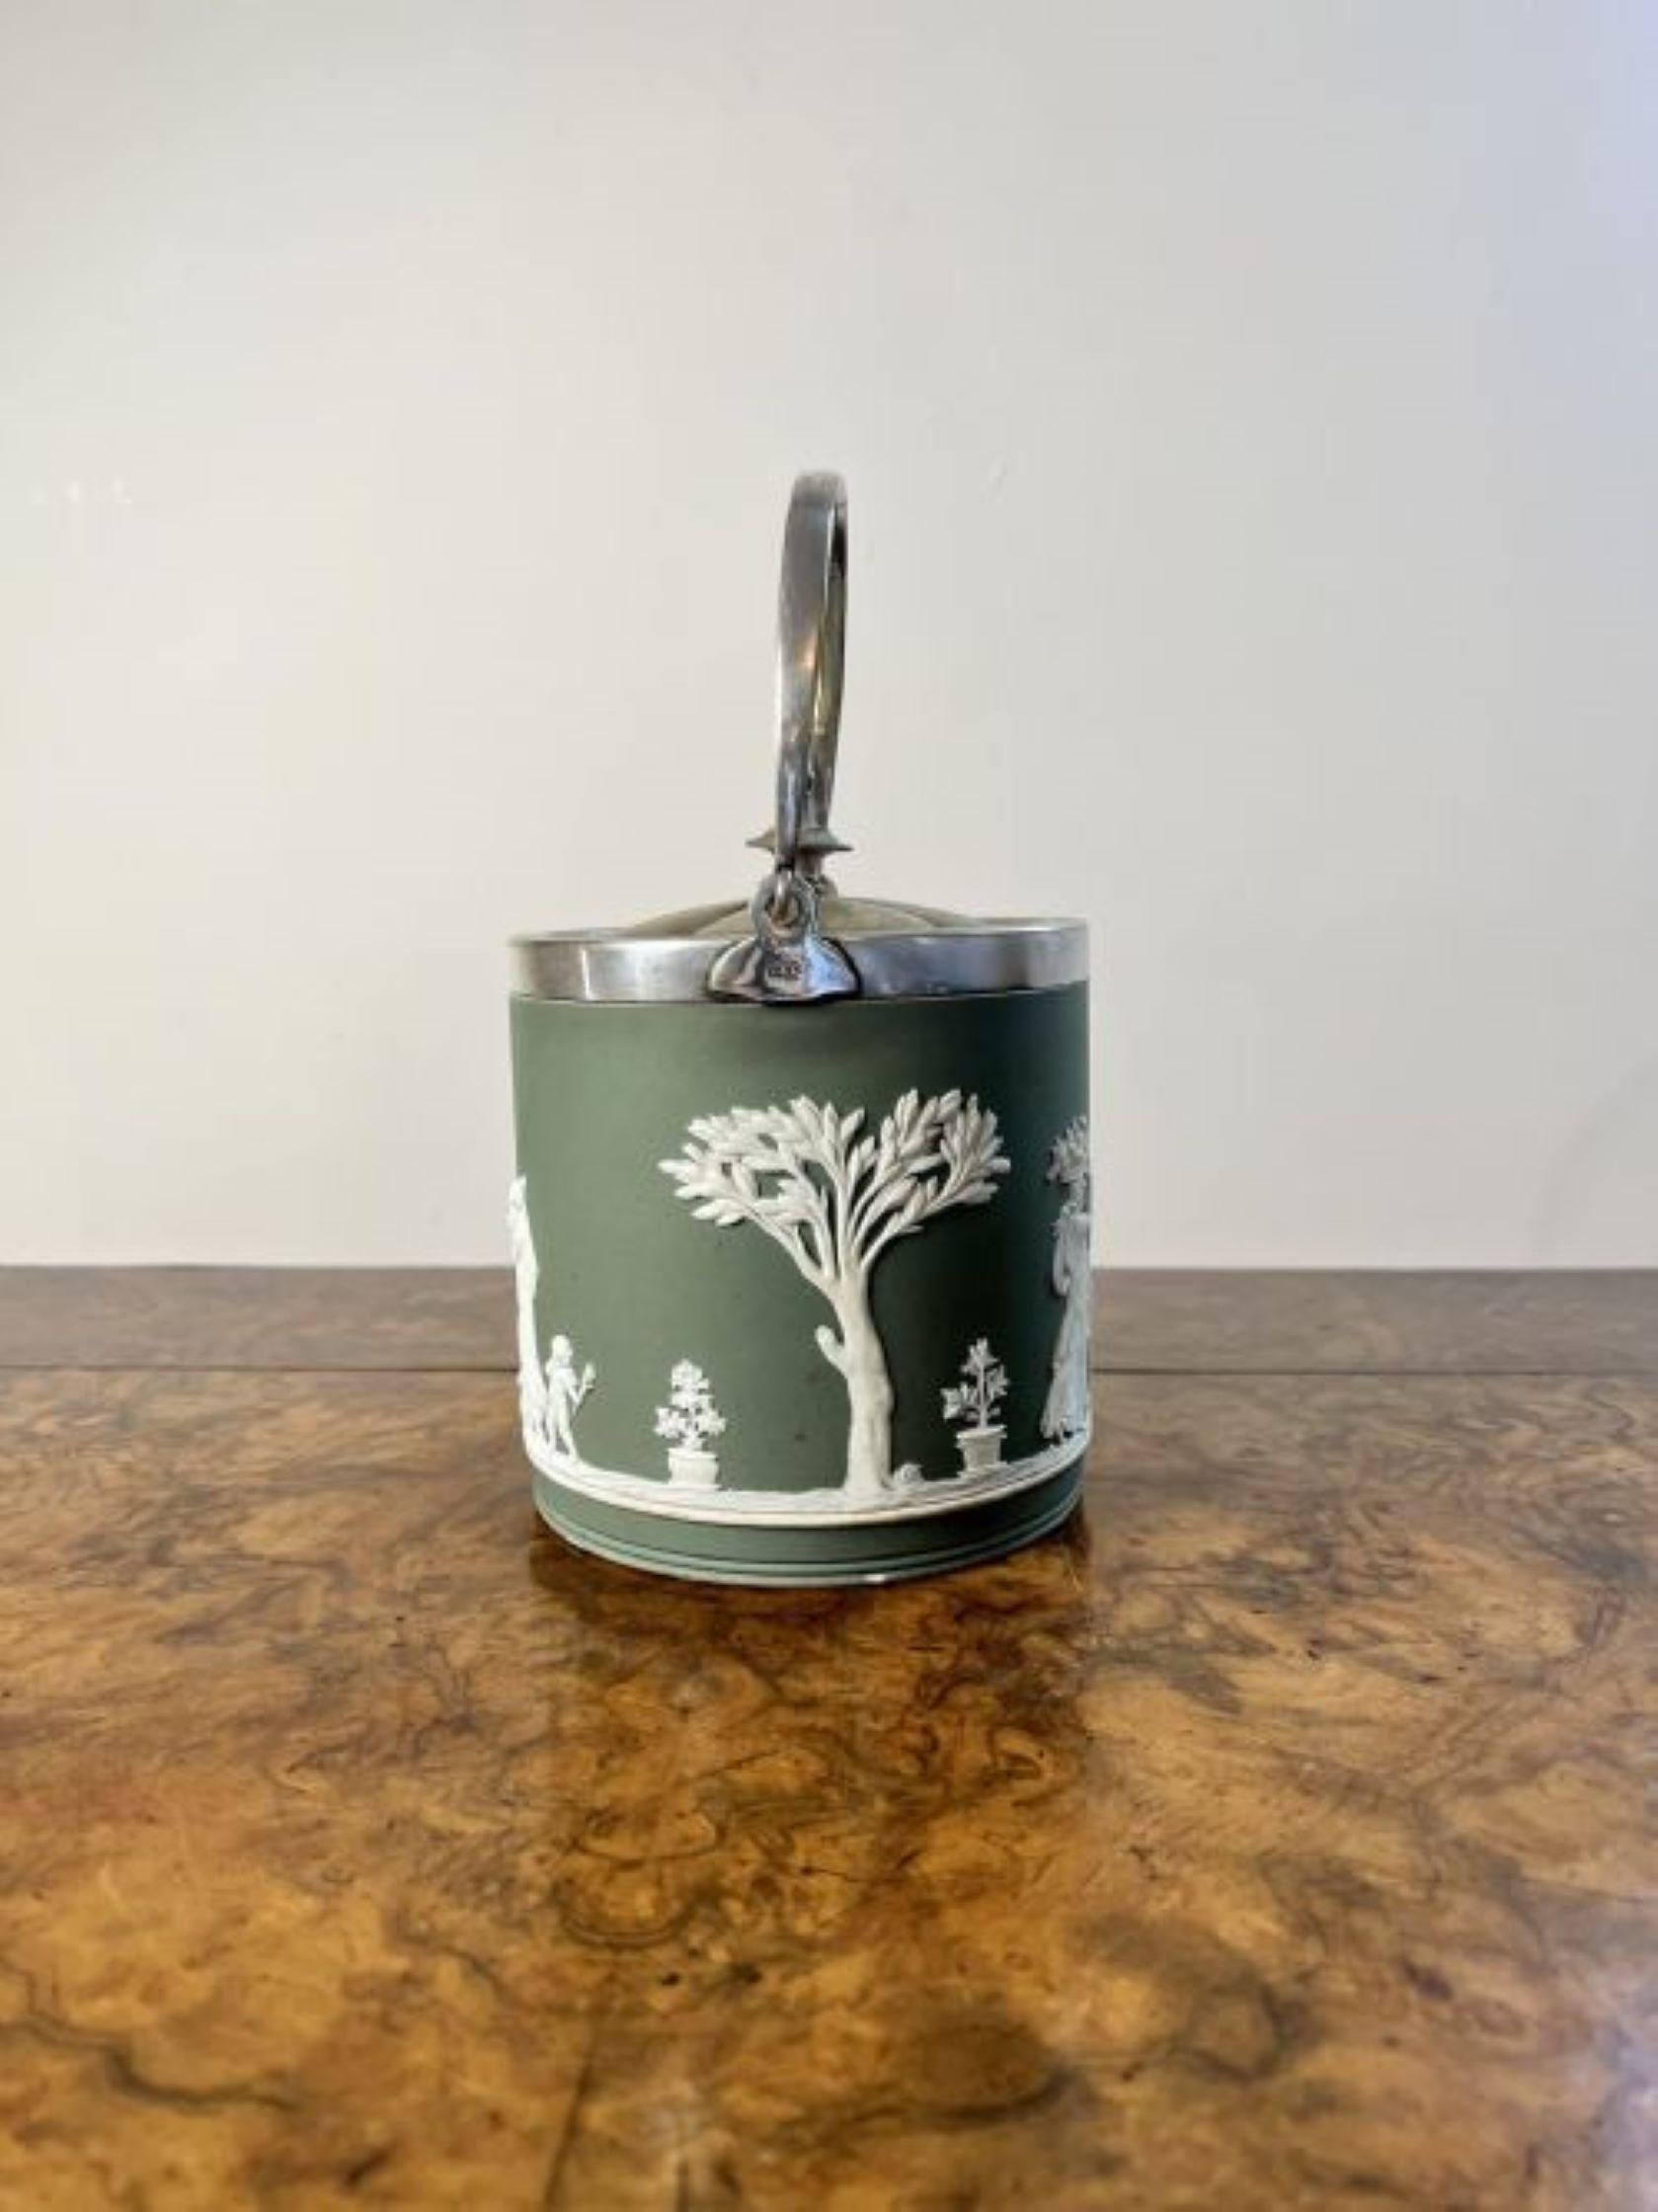 Quality antique Wedgwood Jasper Ware biscuit barrel decorated with classical scenes in a white cameo and green background with a silver plated swing handle to the top and a removable lid. 